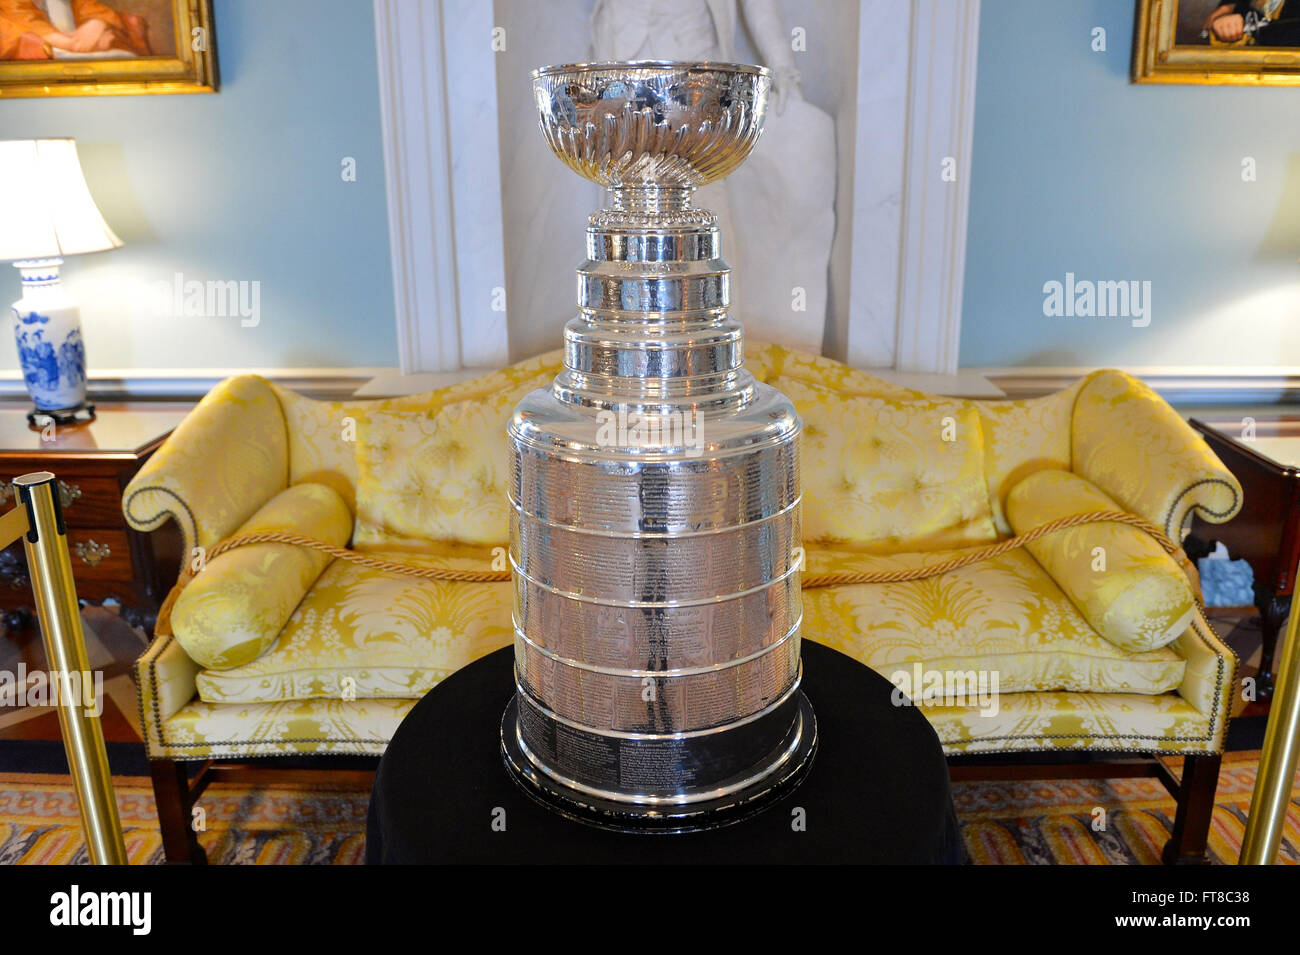 https://c8.alamy.com/comp/FT8C38/the-stanley-cup-the-championship-trophy-awarded-annually-to-the-national-FT8C38.jpg